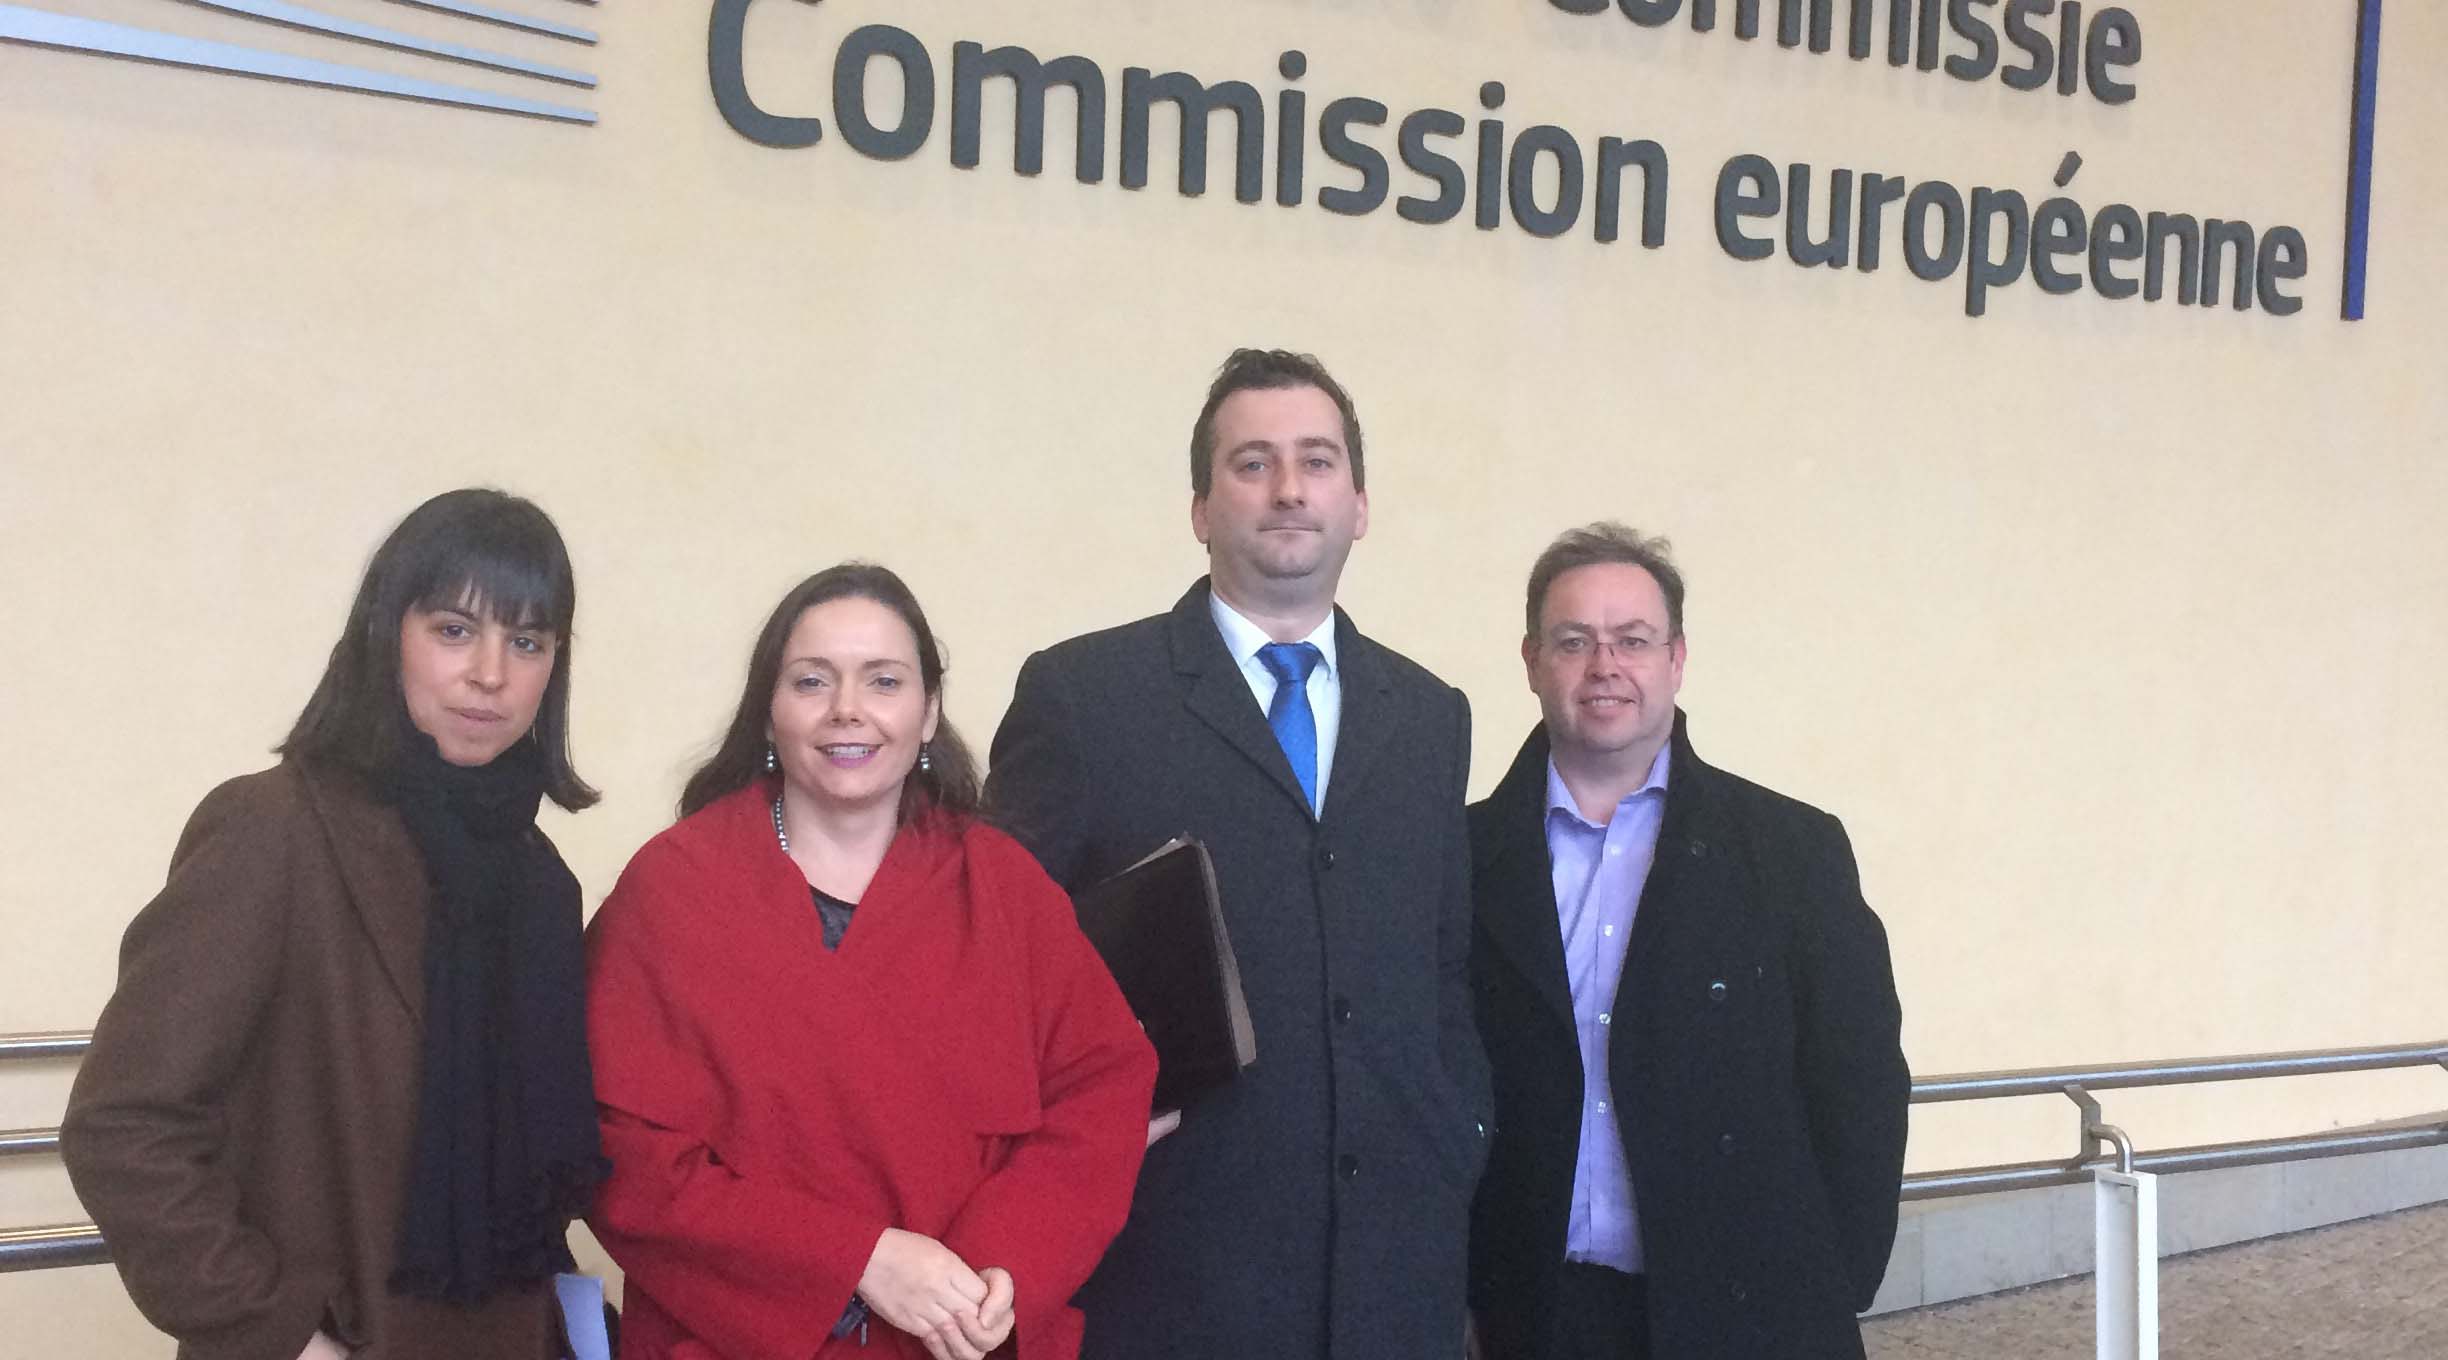 From left: Diageo's Francesca Adurno, ABFI's Patricia Callan with the ISA's William Lavelle and Diageo's Iain Kay attending the Brussels meeting of the EU Commission's Taskforce Article 50.